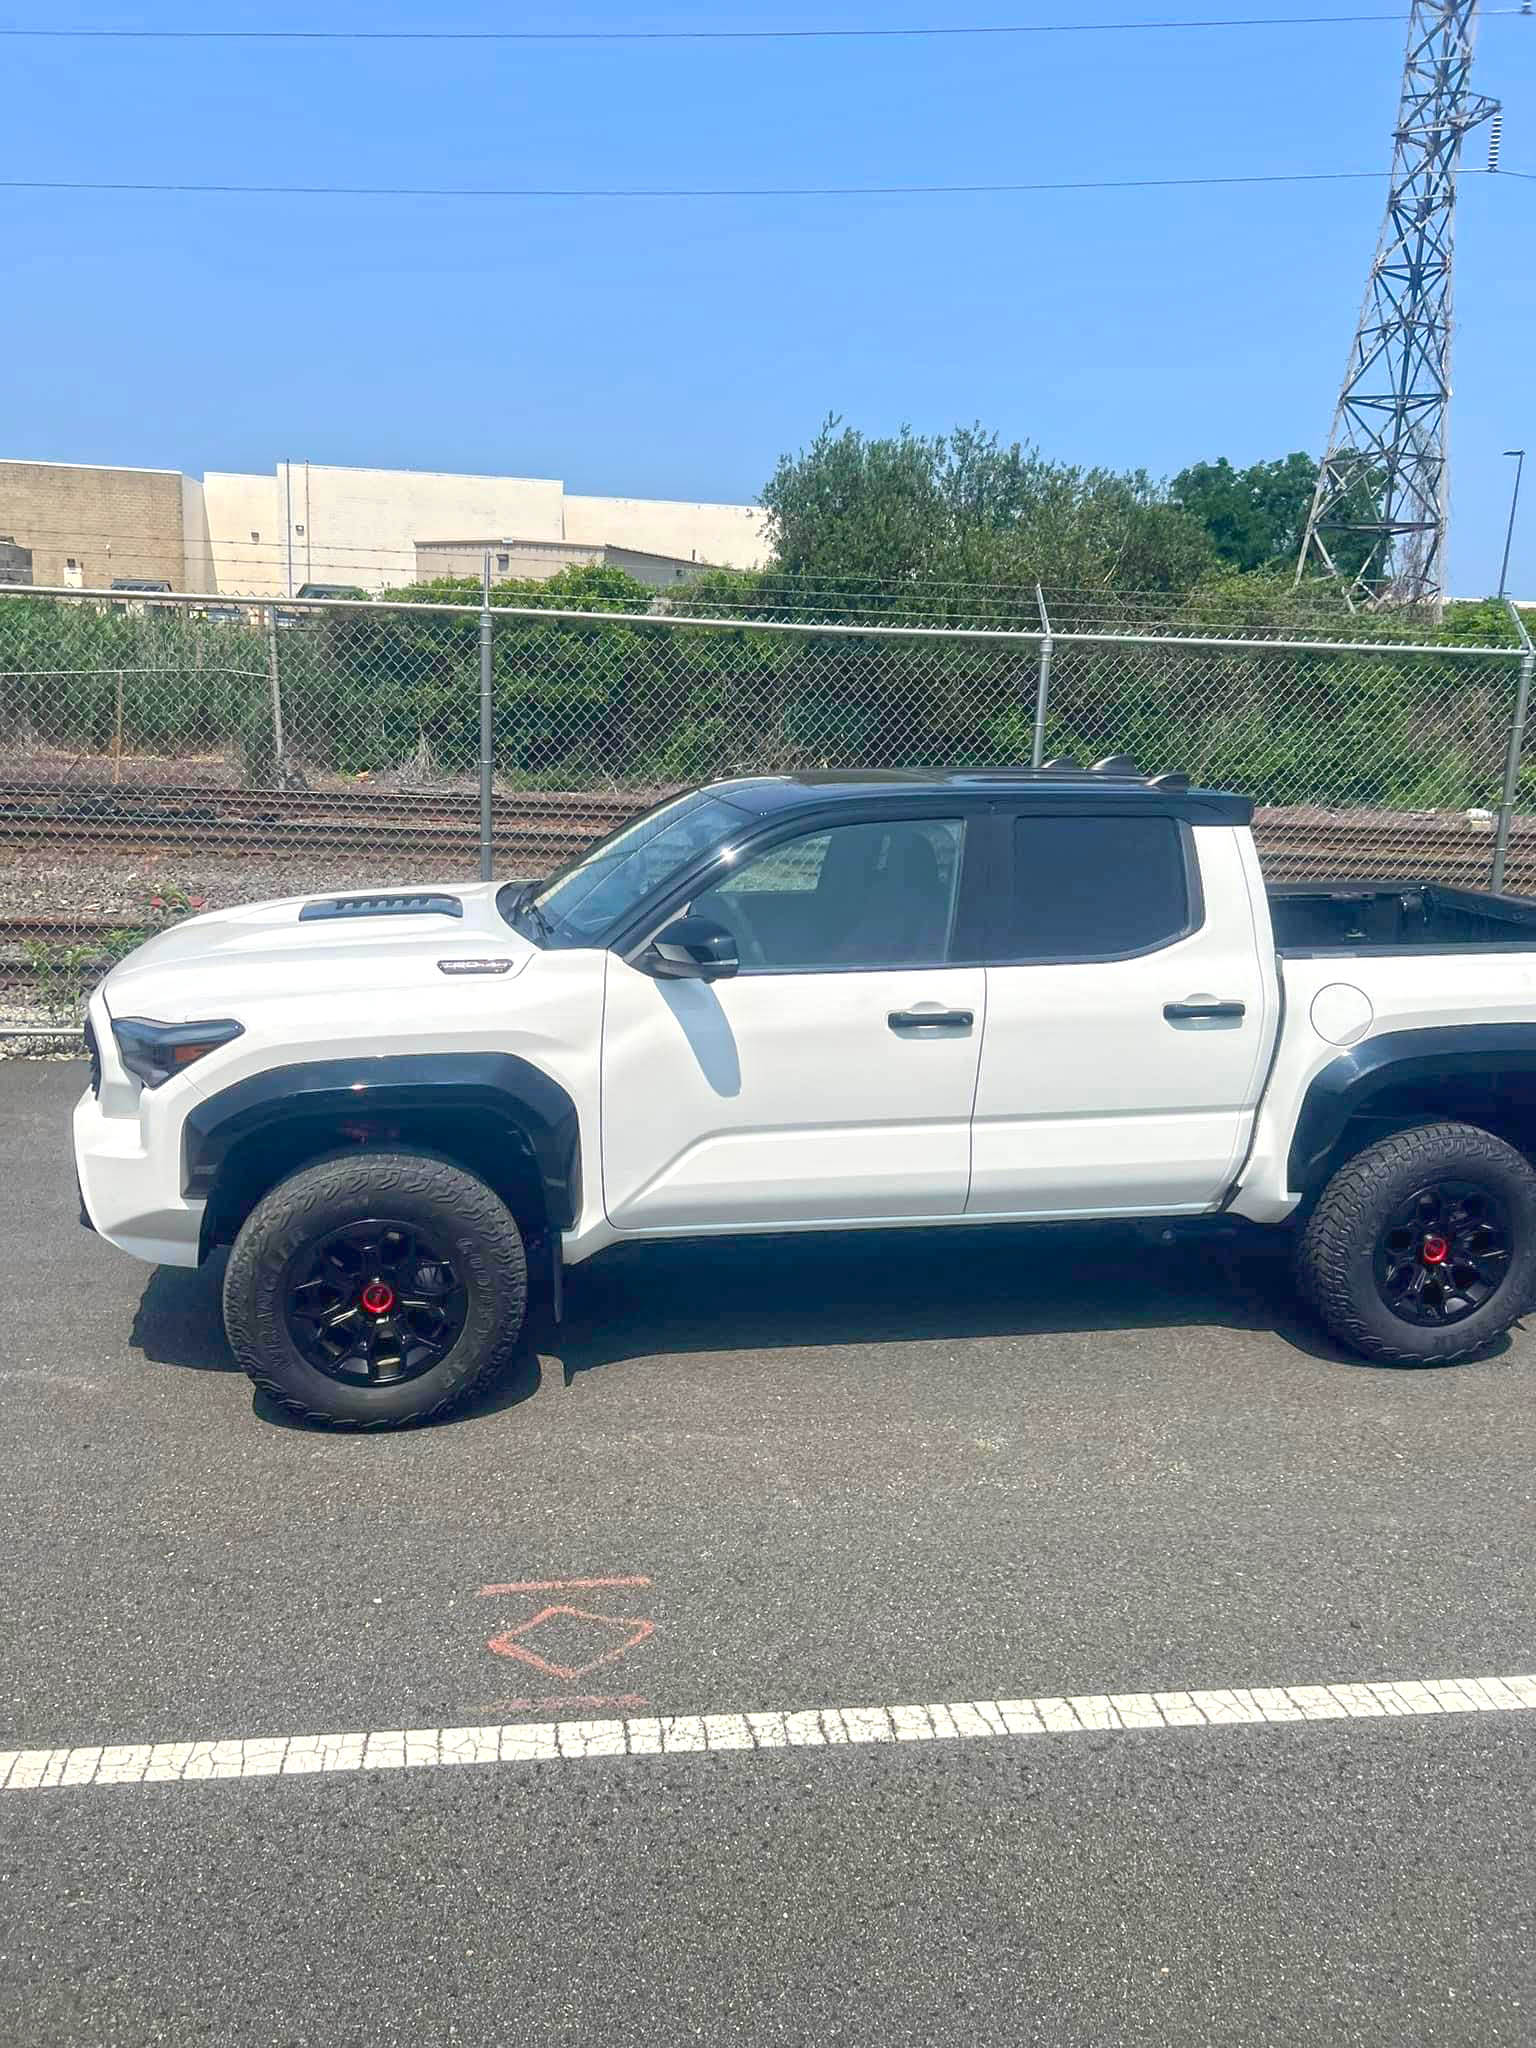 2024 Tacoma Spotted: 2024 Tacoma TRD Pro first wild sighting on the road! 2024 Tacoma TRD Pro 2